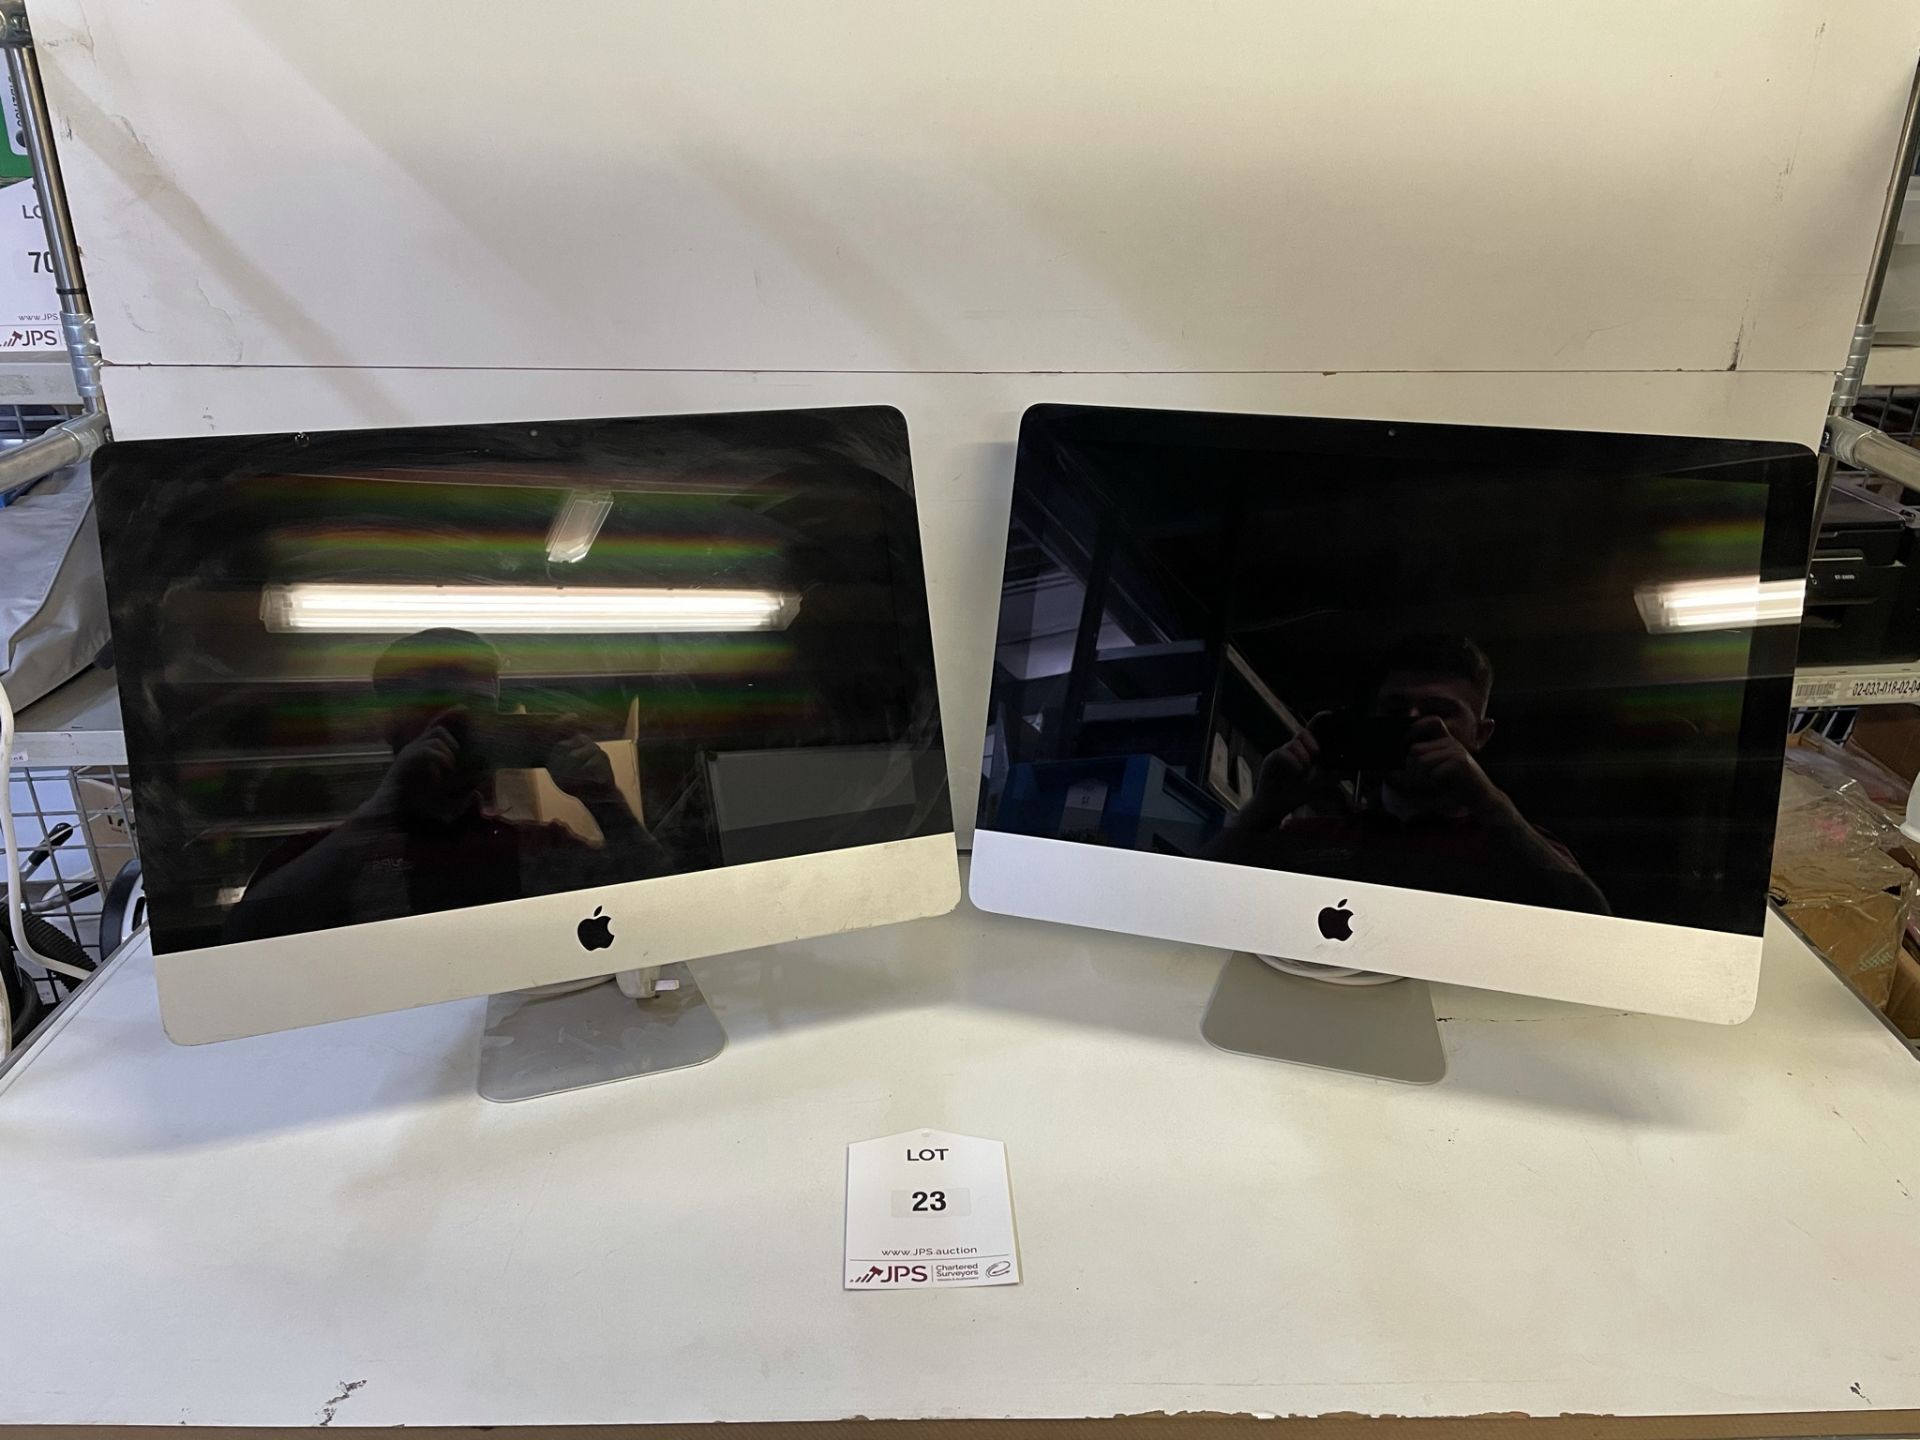 2 x Apple A1311 iMac All-in-One Computers